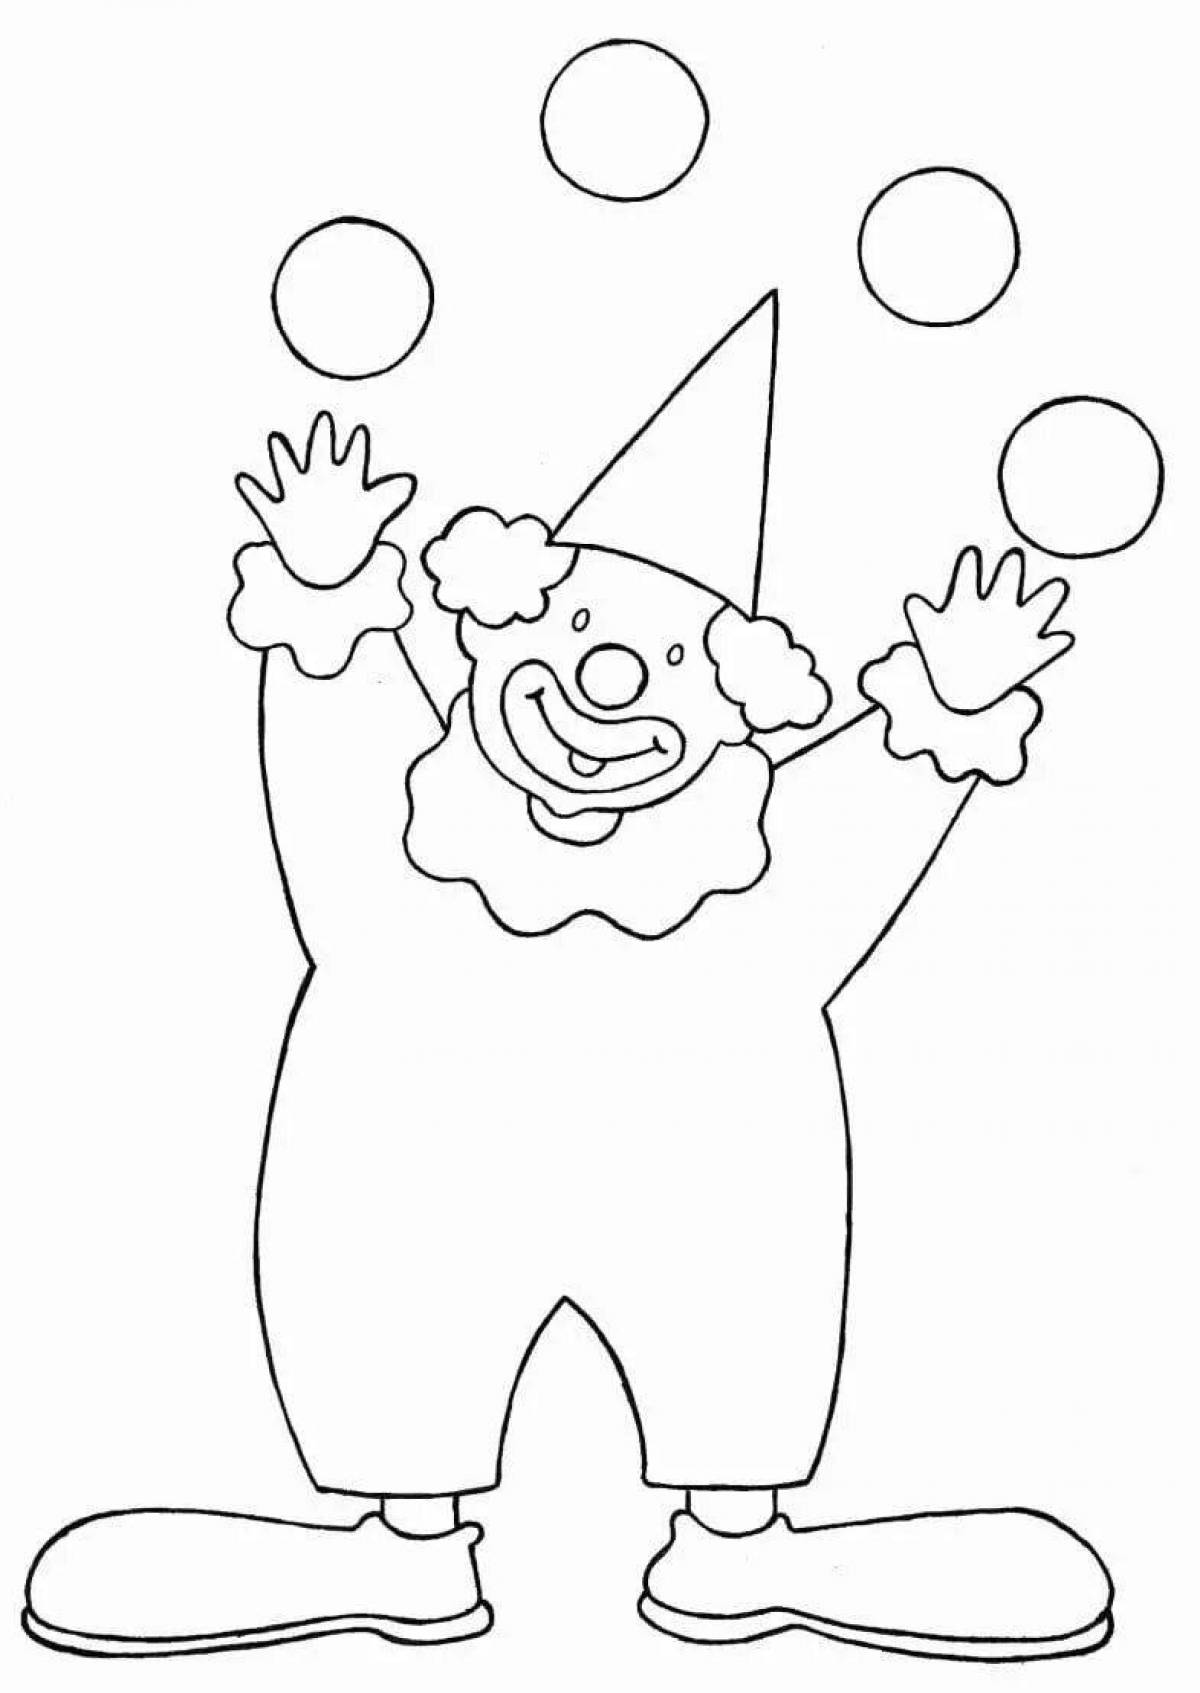 Playful parsley coloring page